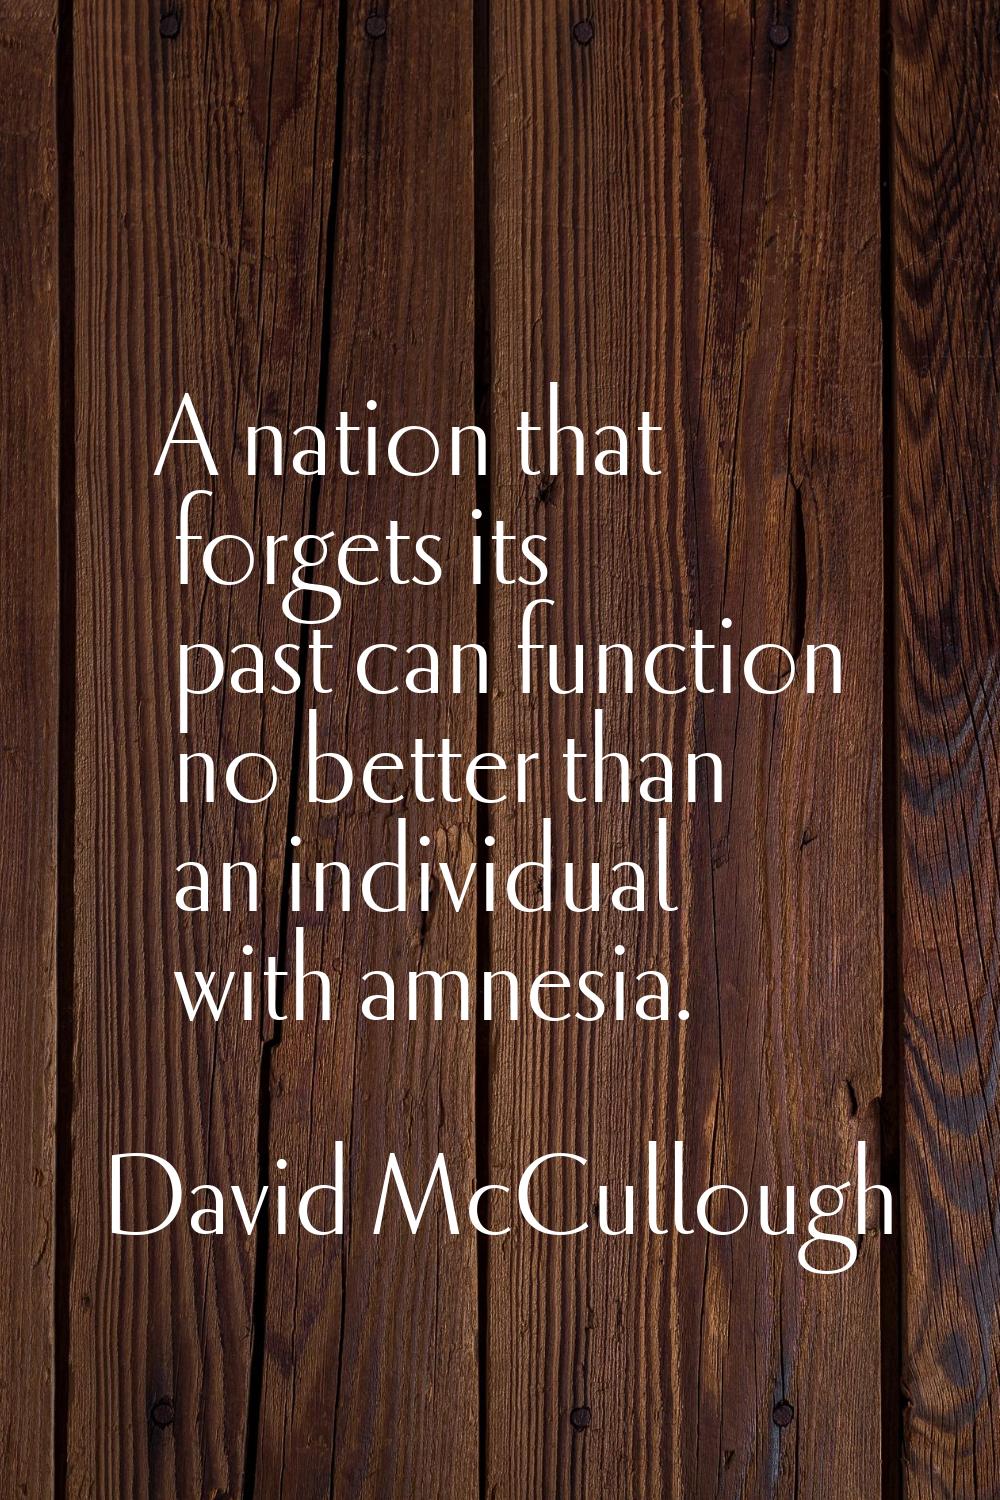 A nation that forgets its past can function no better than an individual with amnesia.